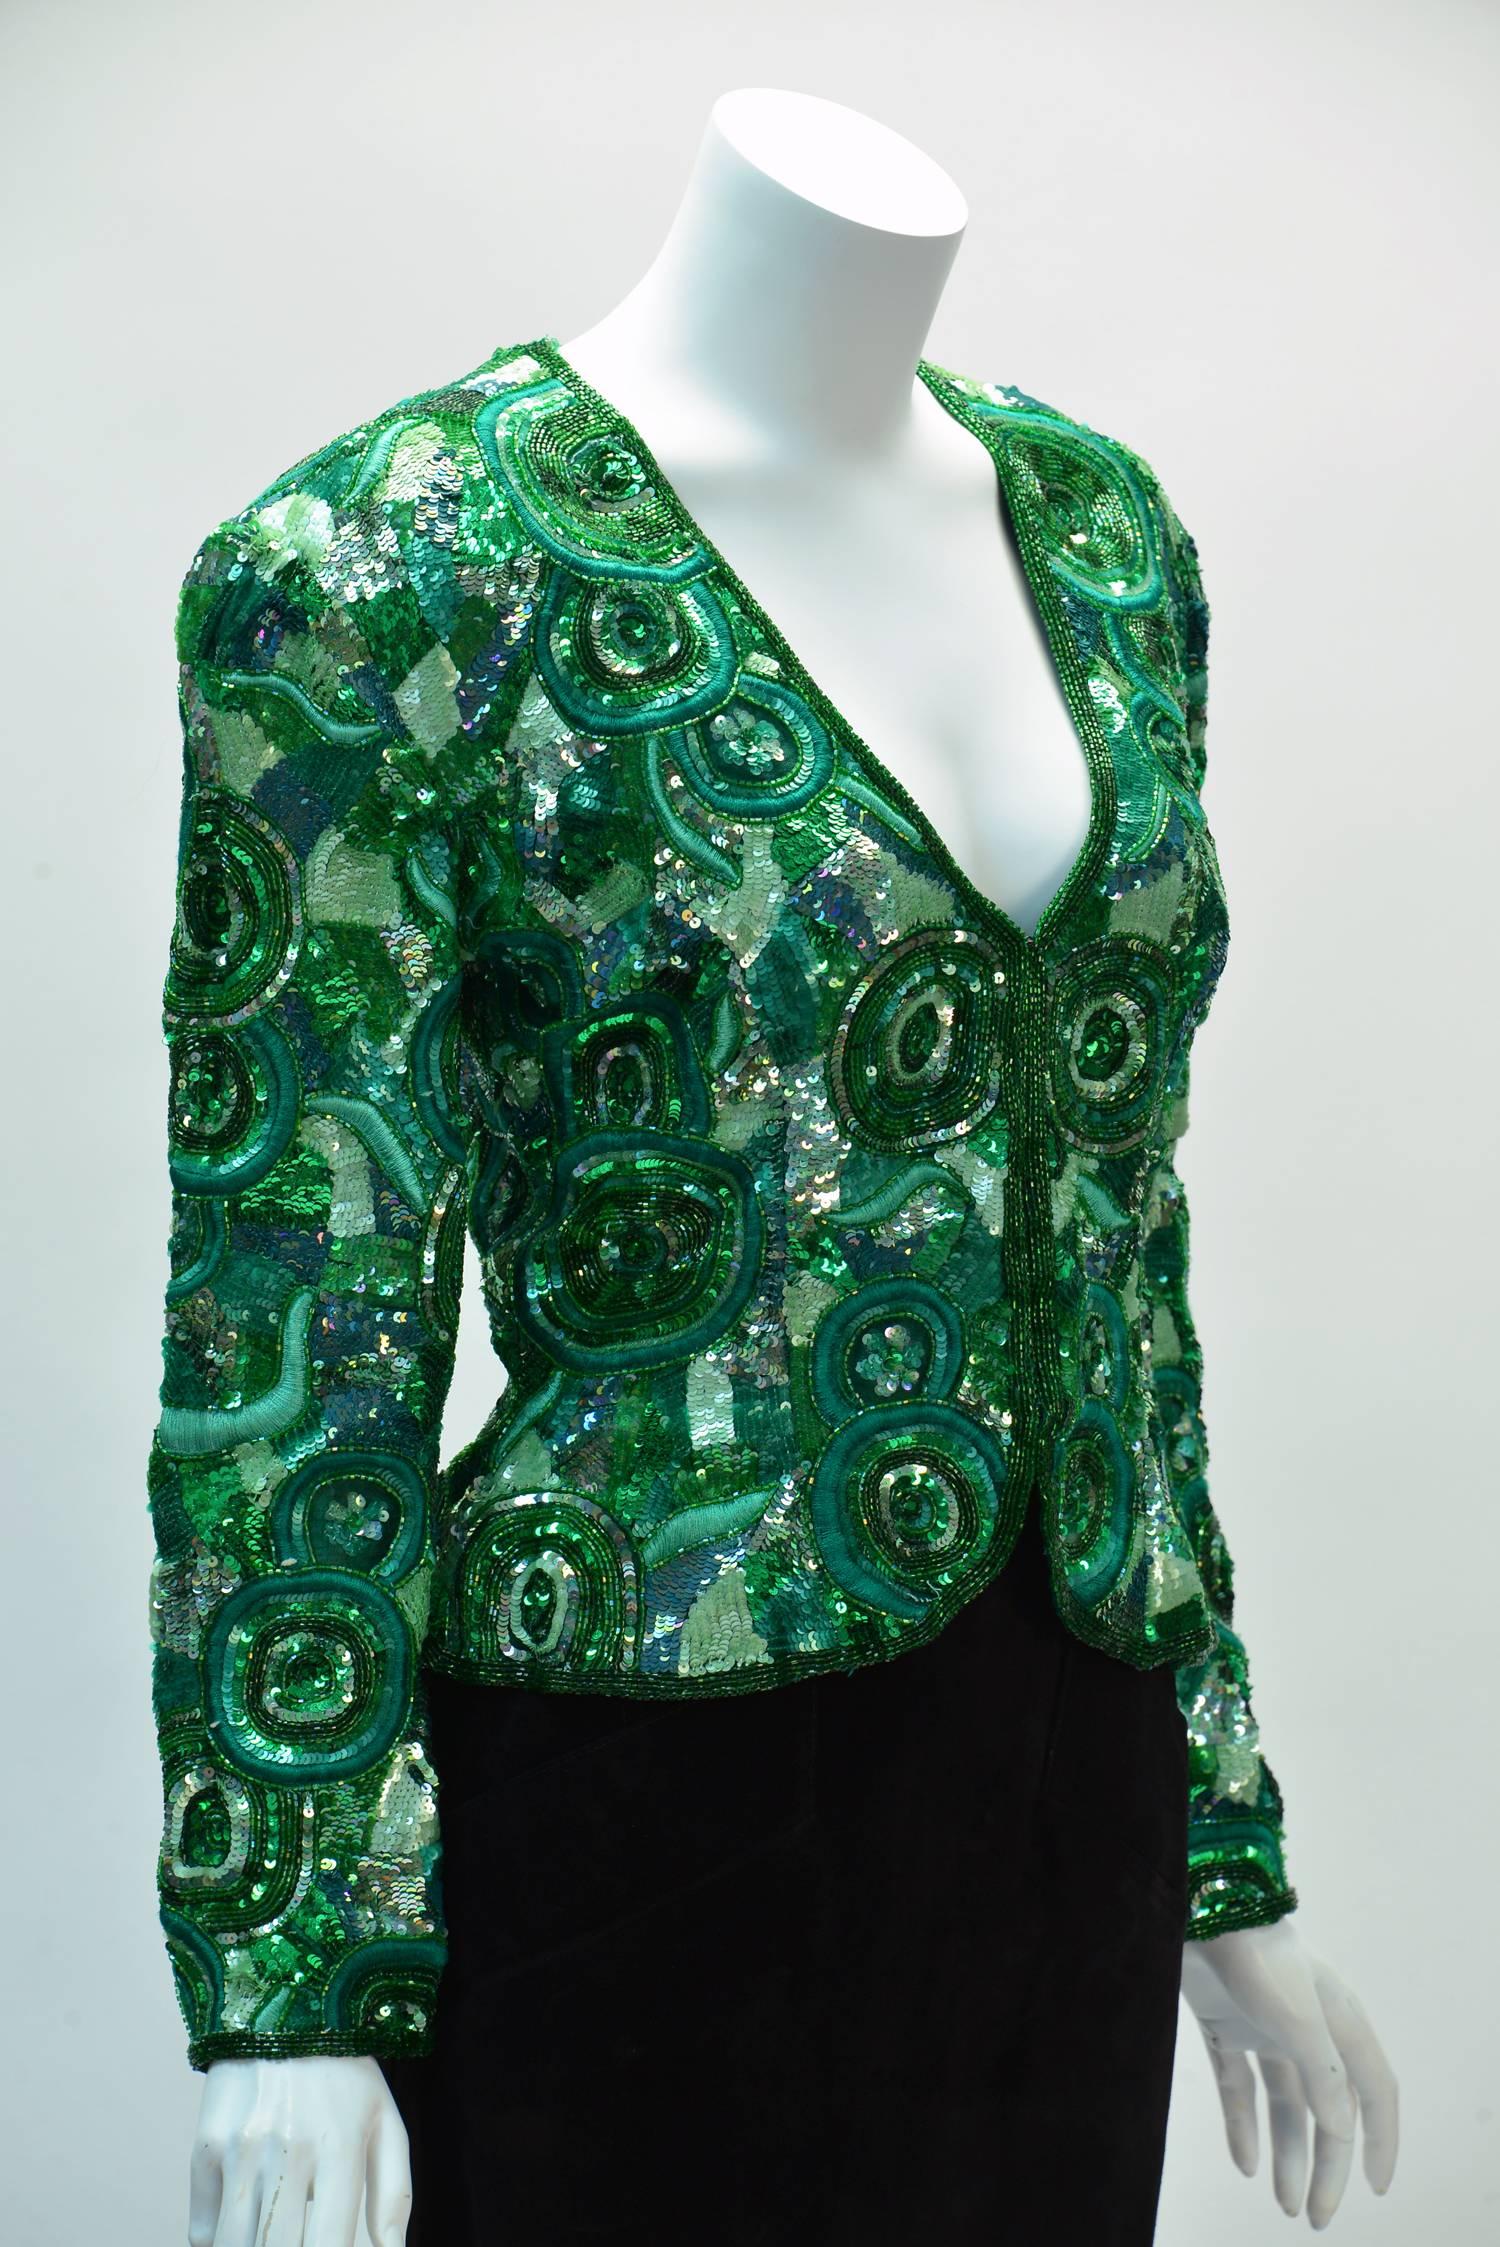  Festive Naeem Khan green sequin jacket created in the 1980's for his Riazee Line. Naeem Khan, known for his elaborate embellishment work, shows us how it is done with this jacket.  Embroidery and sequins throughout! Jacket has a plunging neck line